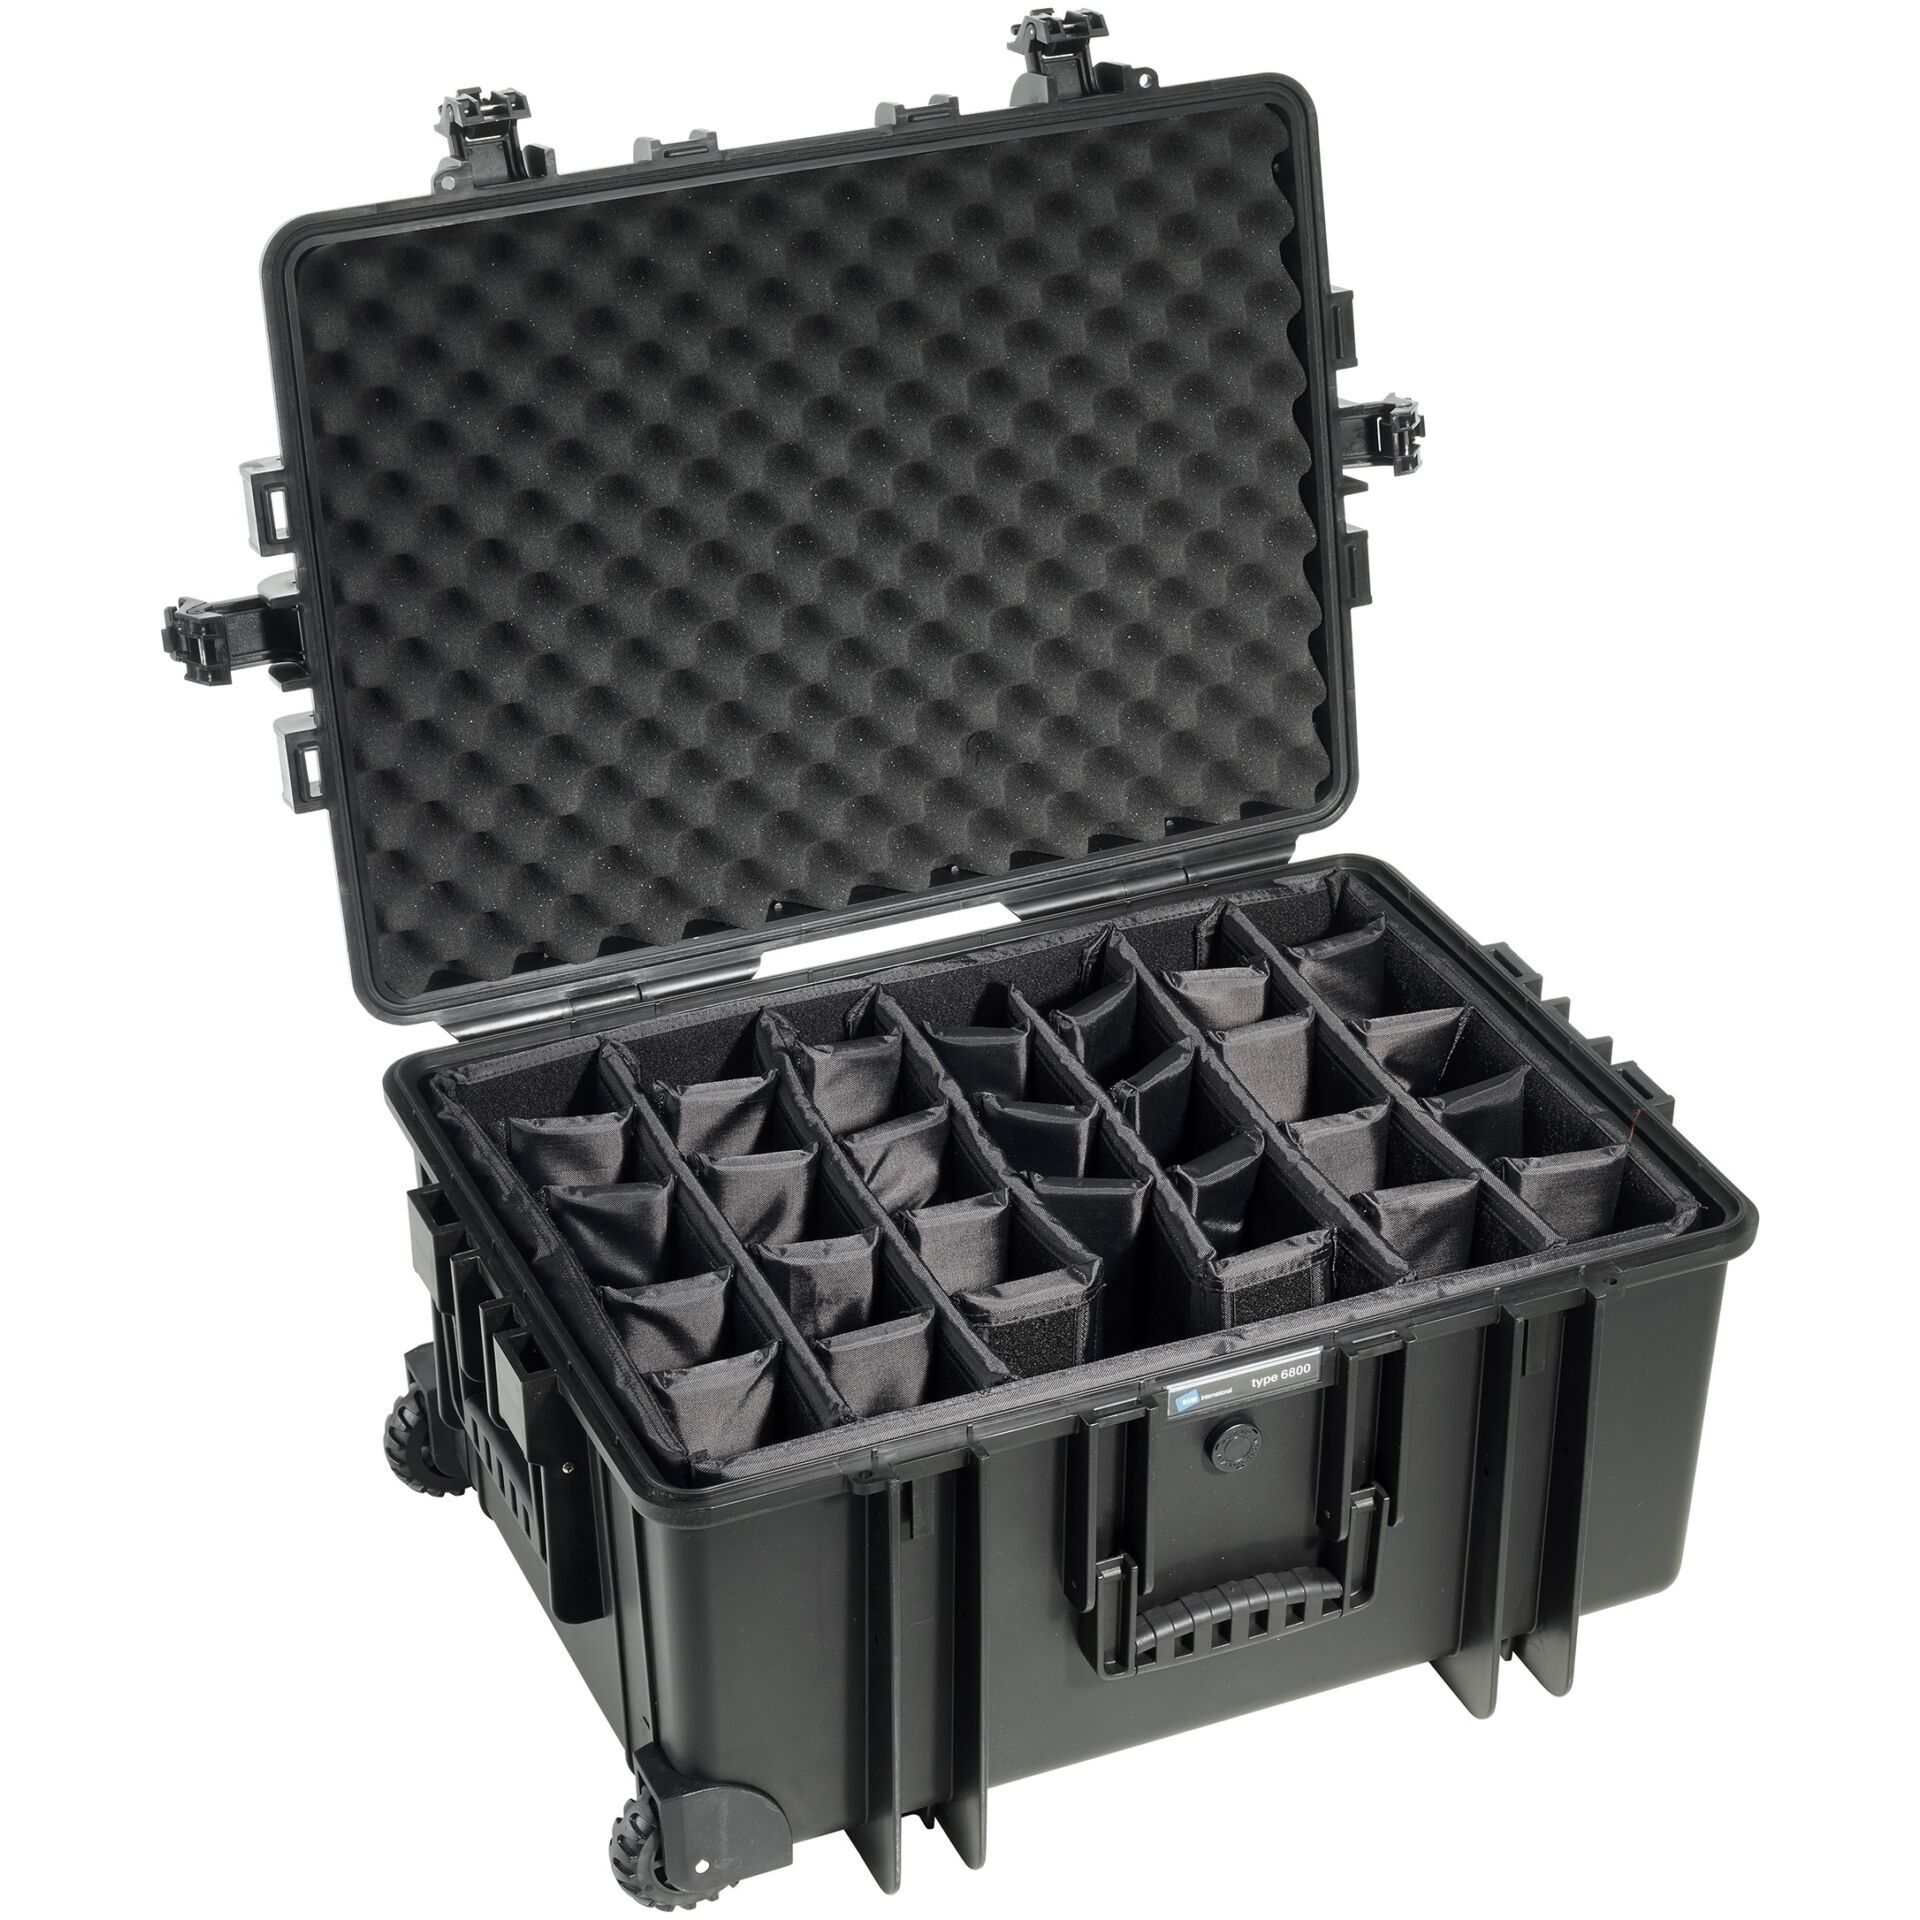 B&W Outdoor Case 6800 incl. divider system black